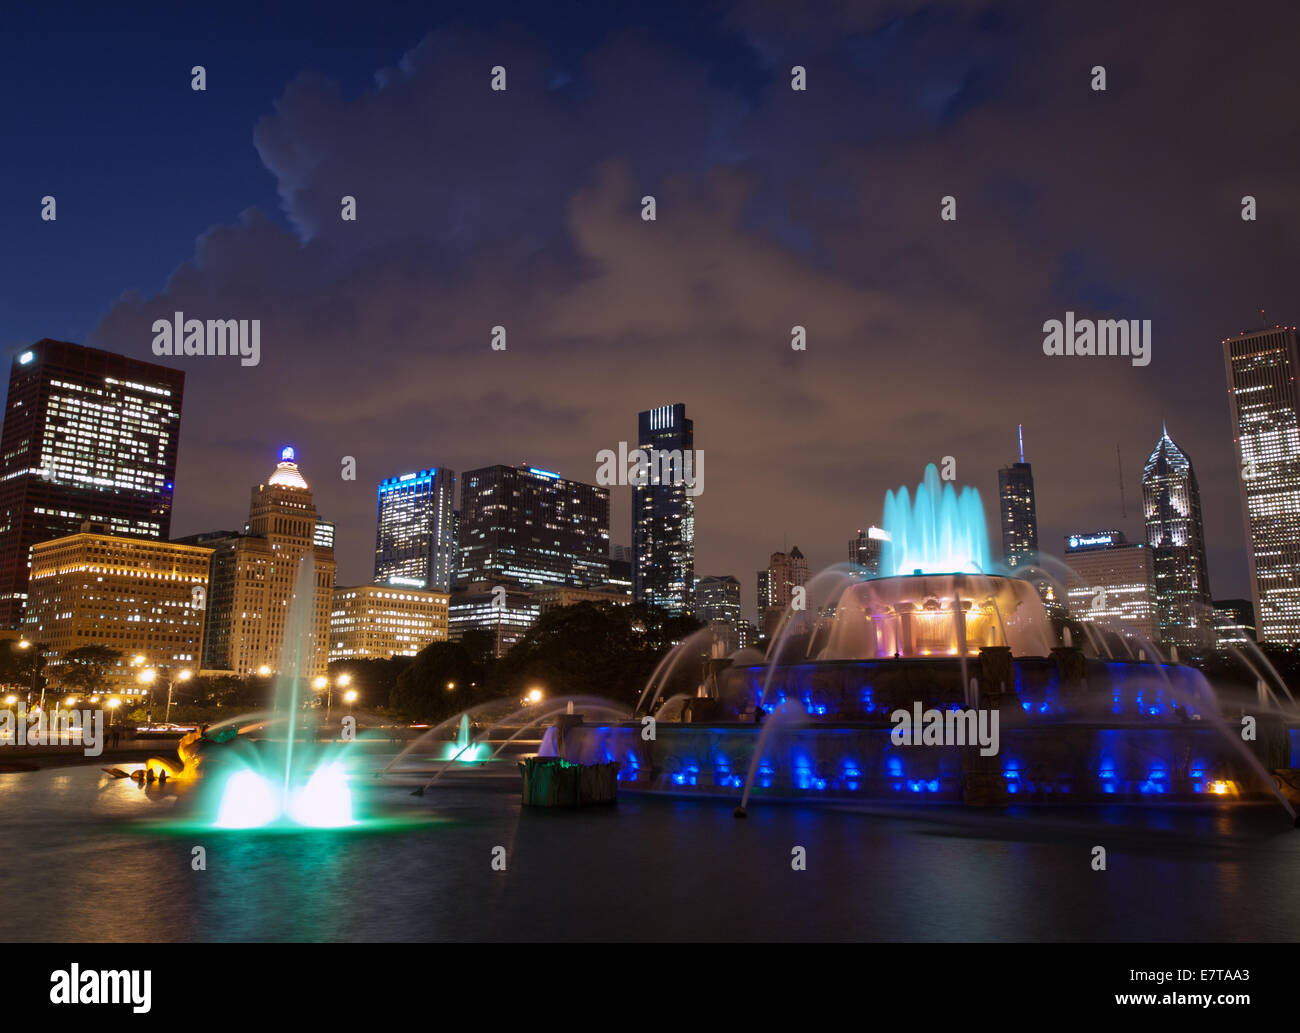 A night, blue hour view of Buckingham Fountain and the Chicago skyline.  Grant Park, Chicago, Illinois. Stock Photo